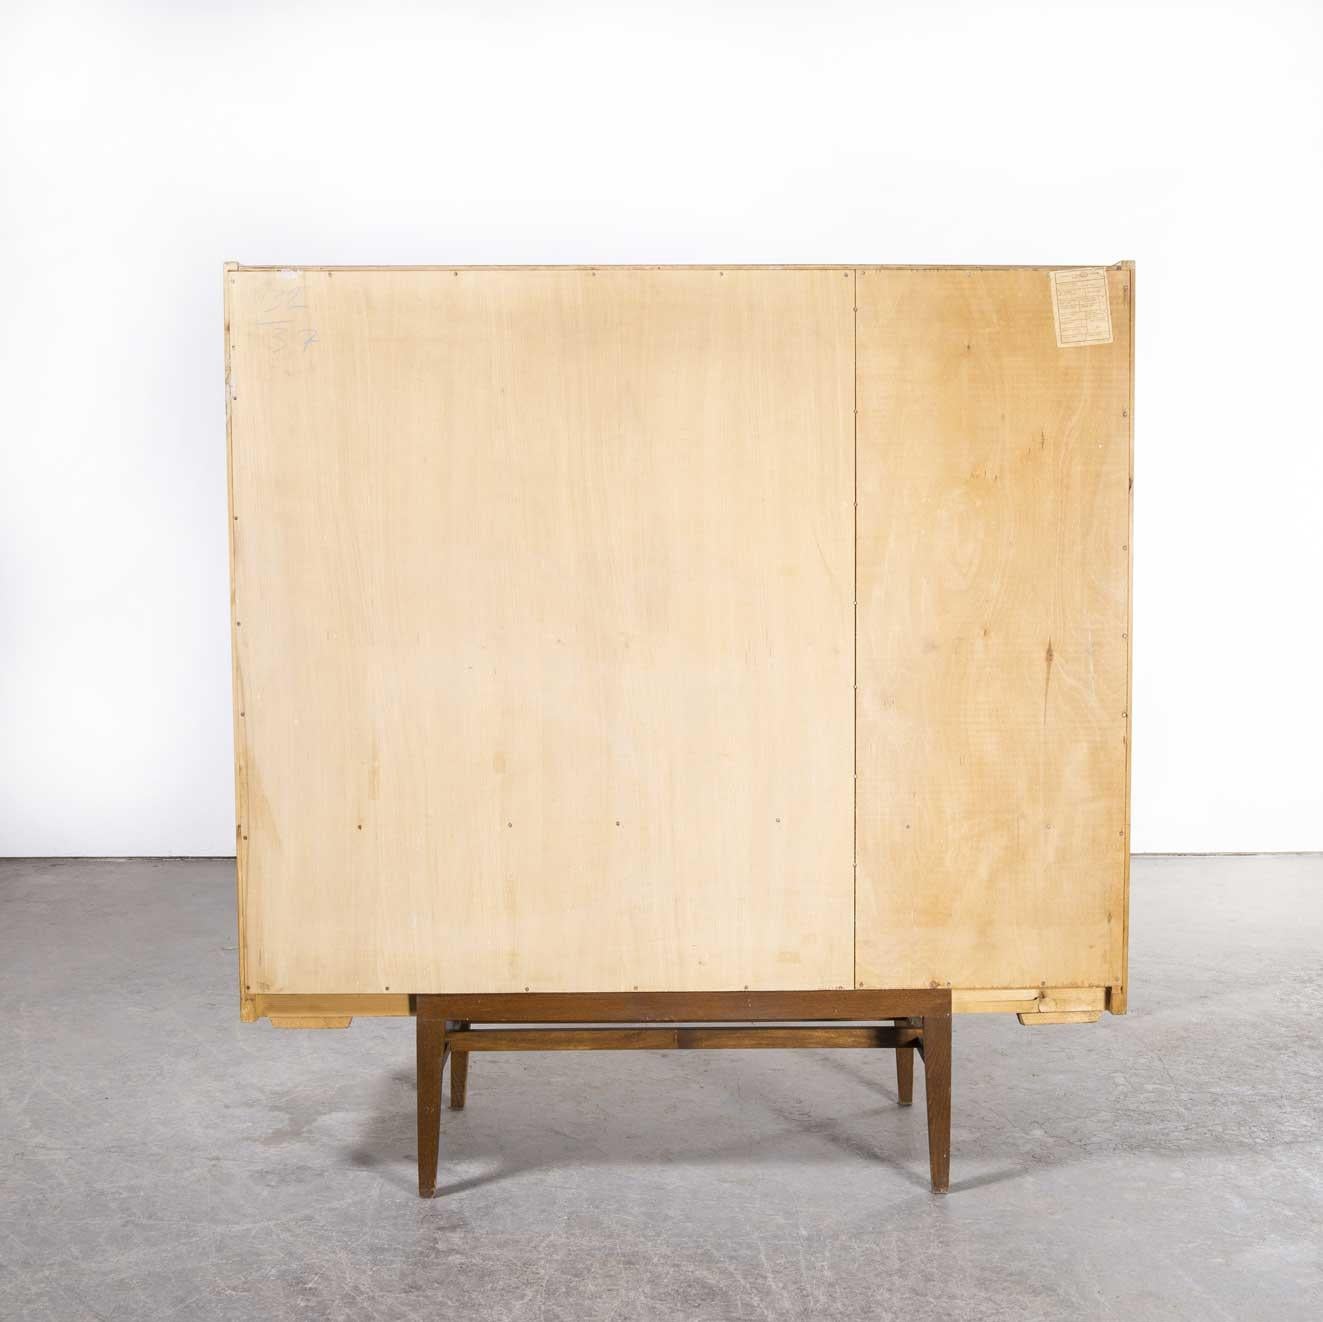 1960’s Large mid-century glass fronted cabinet – Up Zavody
1960’s Large mid-century glass fronted cabinet – Up Zavody. Superb practical piece of mid century storage by the Czech maker Up Zavody and designed by Frantisek Mezulanik. Czech was a large